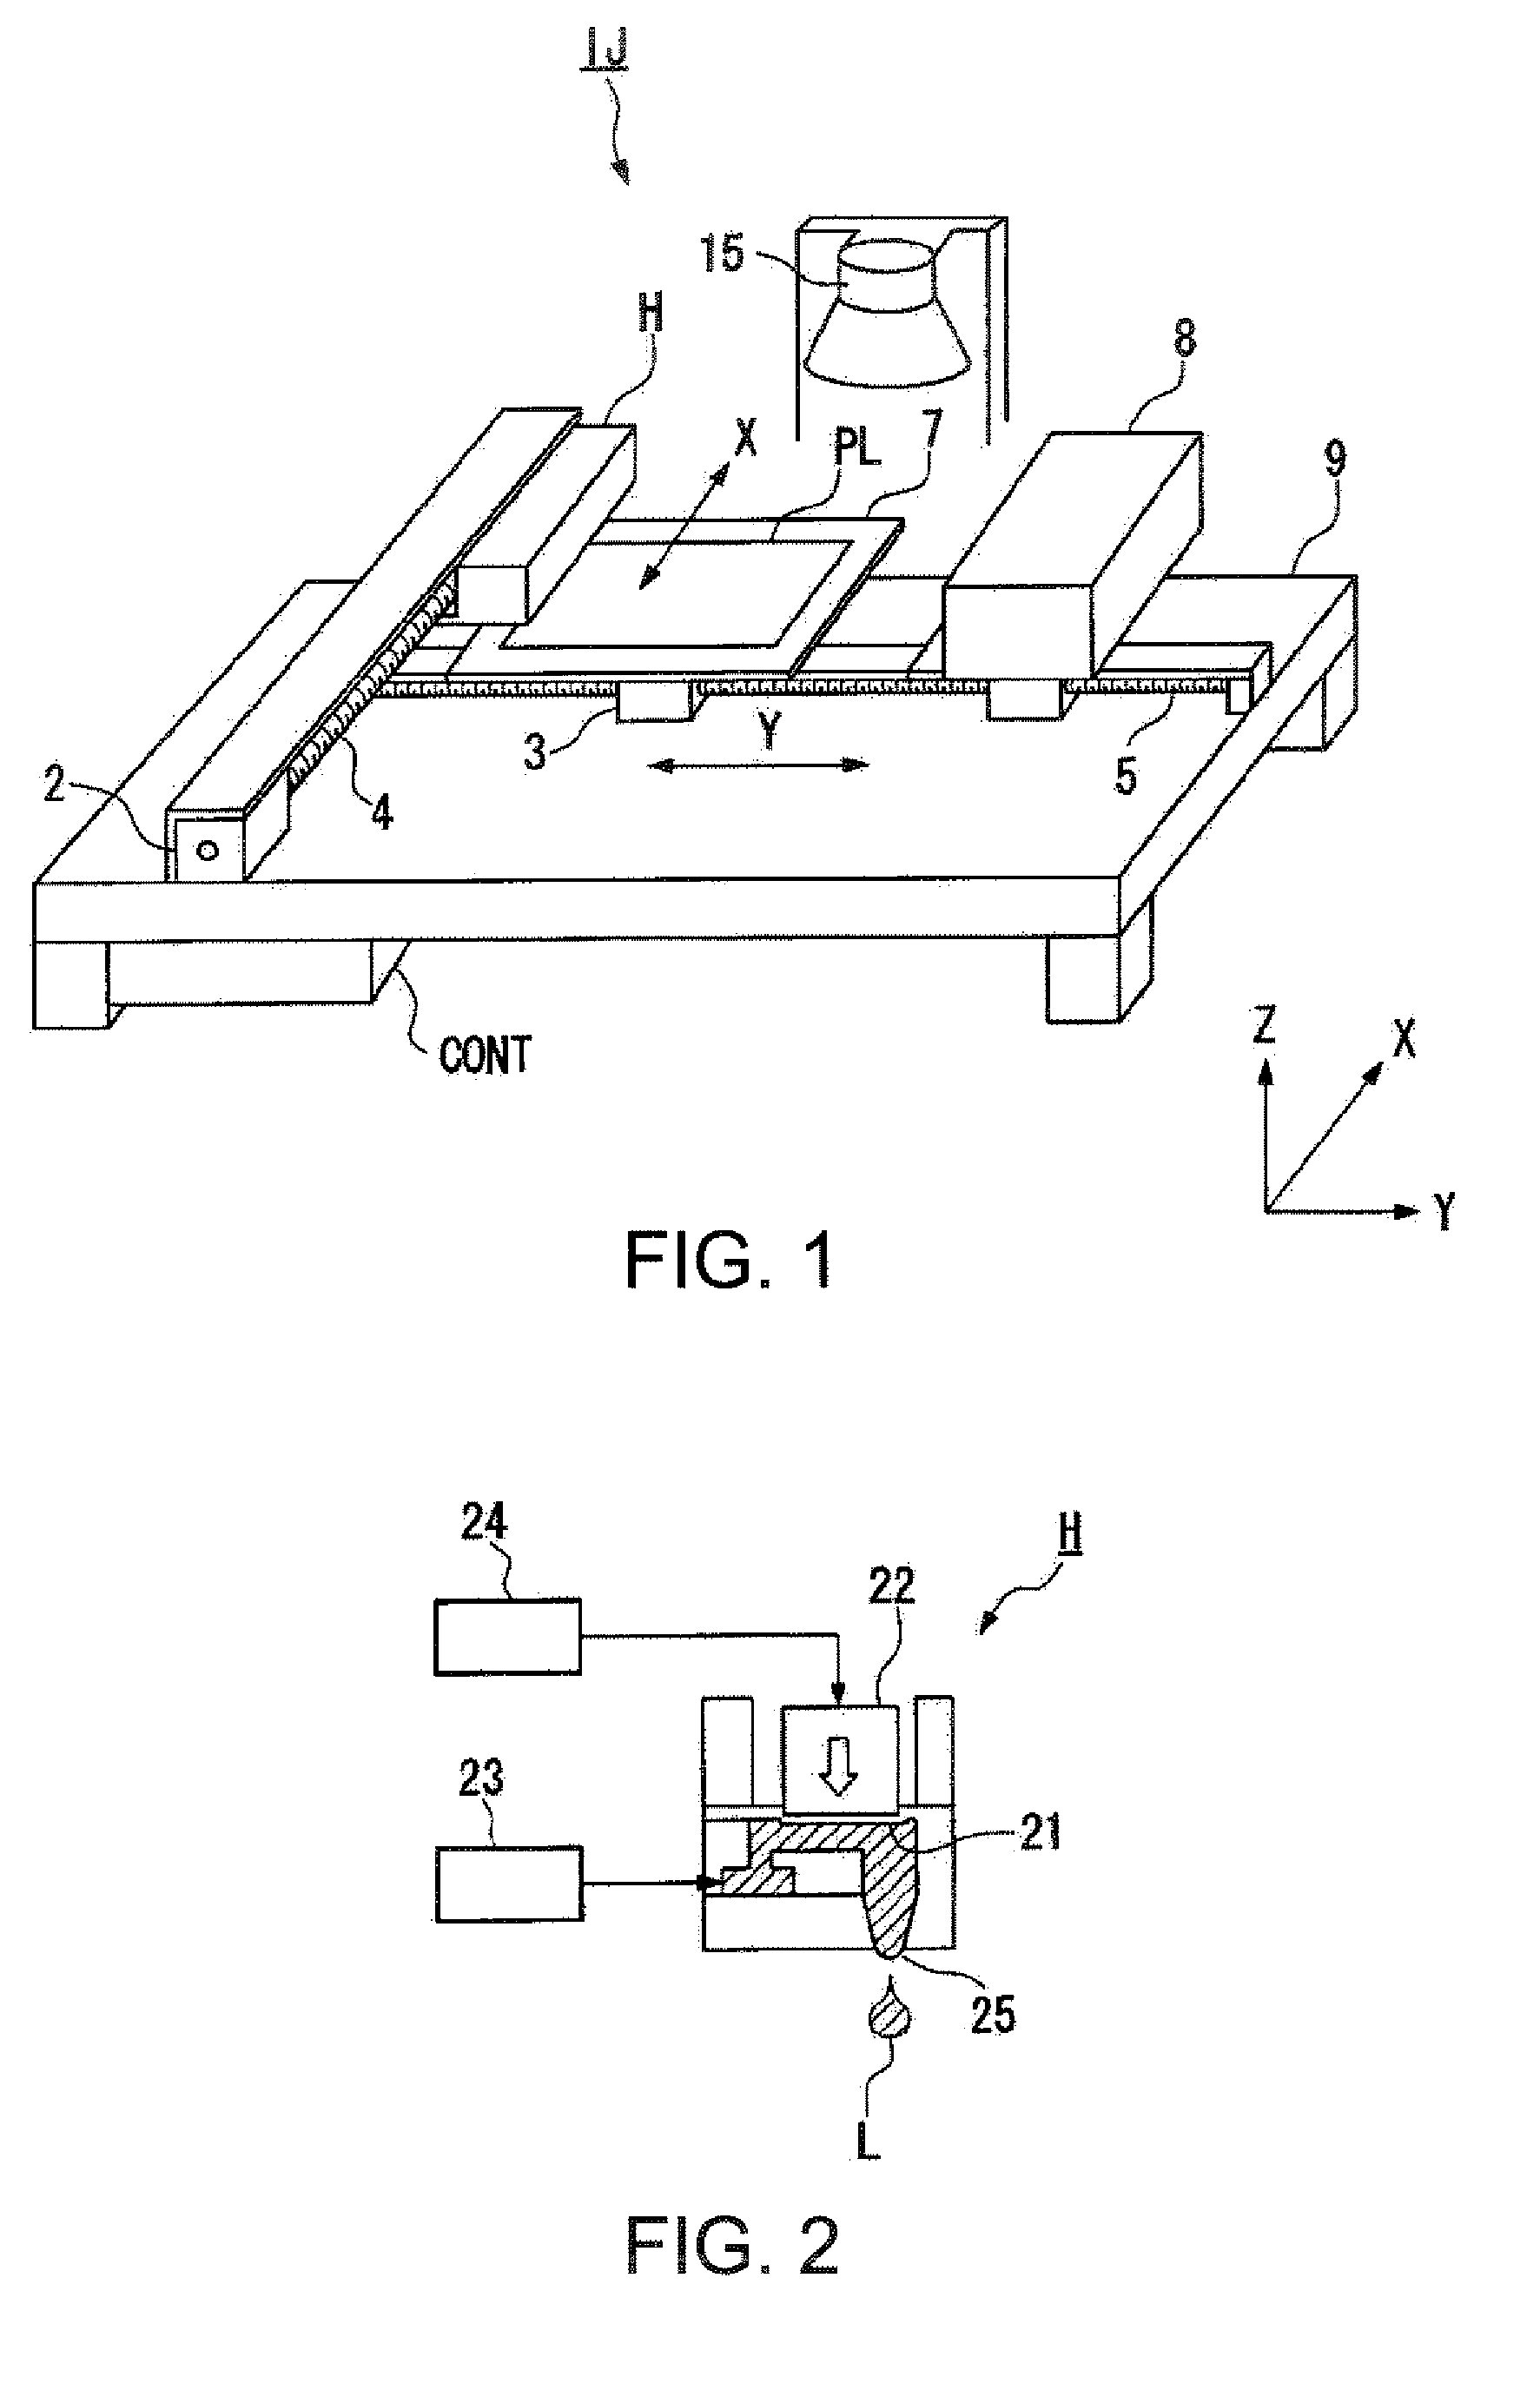 Film pattern forming method, device, electro-optical apparatus, and electronic appliance